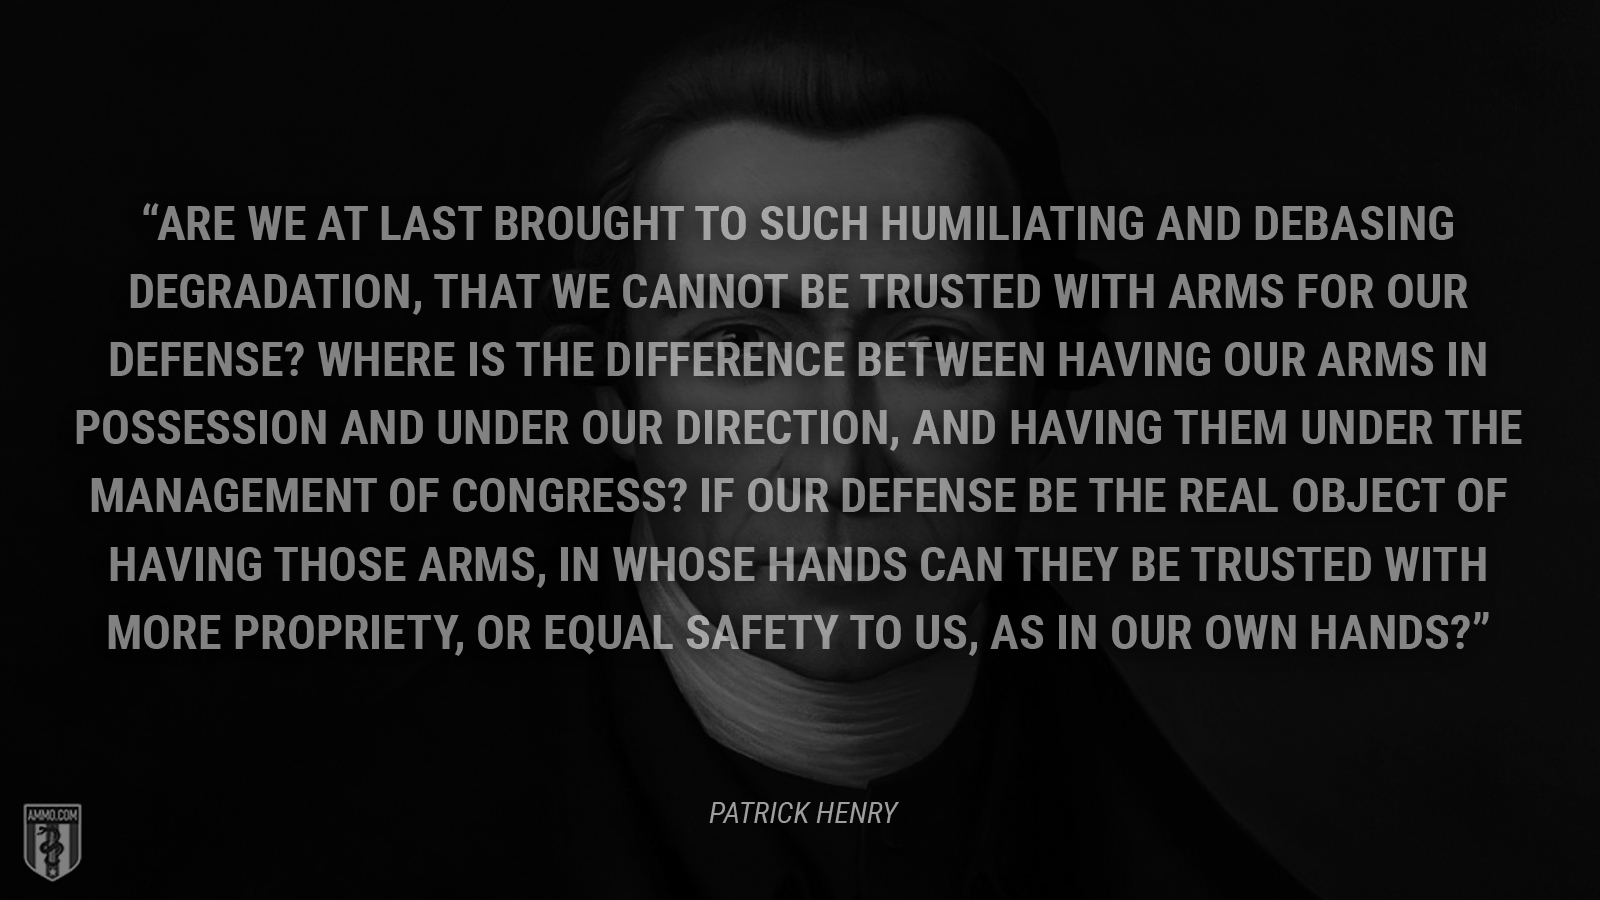 “Are we at last brought to such humiliating and debasing degradation, that we cannot be trusted with arms for our defense? Where is the difference between having our arms in possession and under our direction, and having them under the management of Congress? If our defense be the real object of having those arms, in whose hands can they be trusted with more propriety, or equal safety to us, as in our own hands?” - Patrick Henry